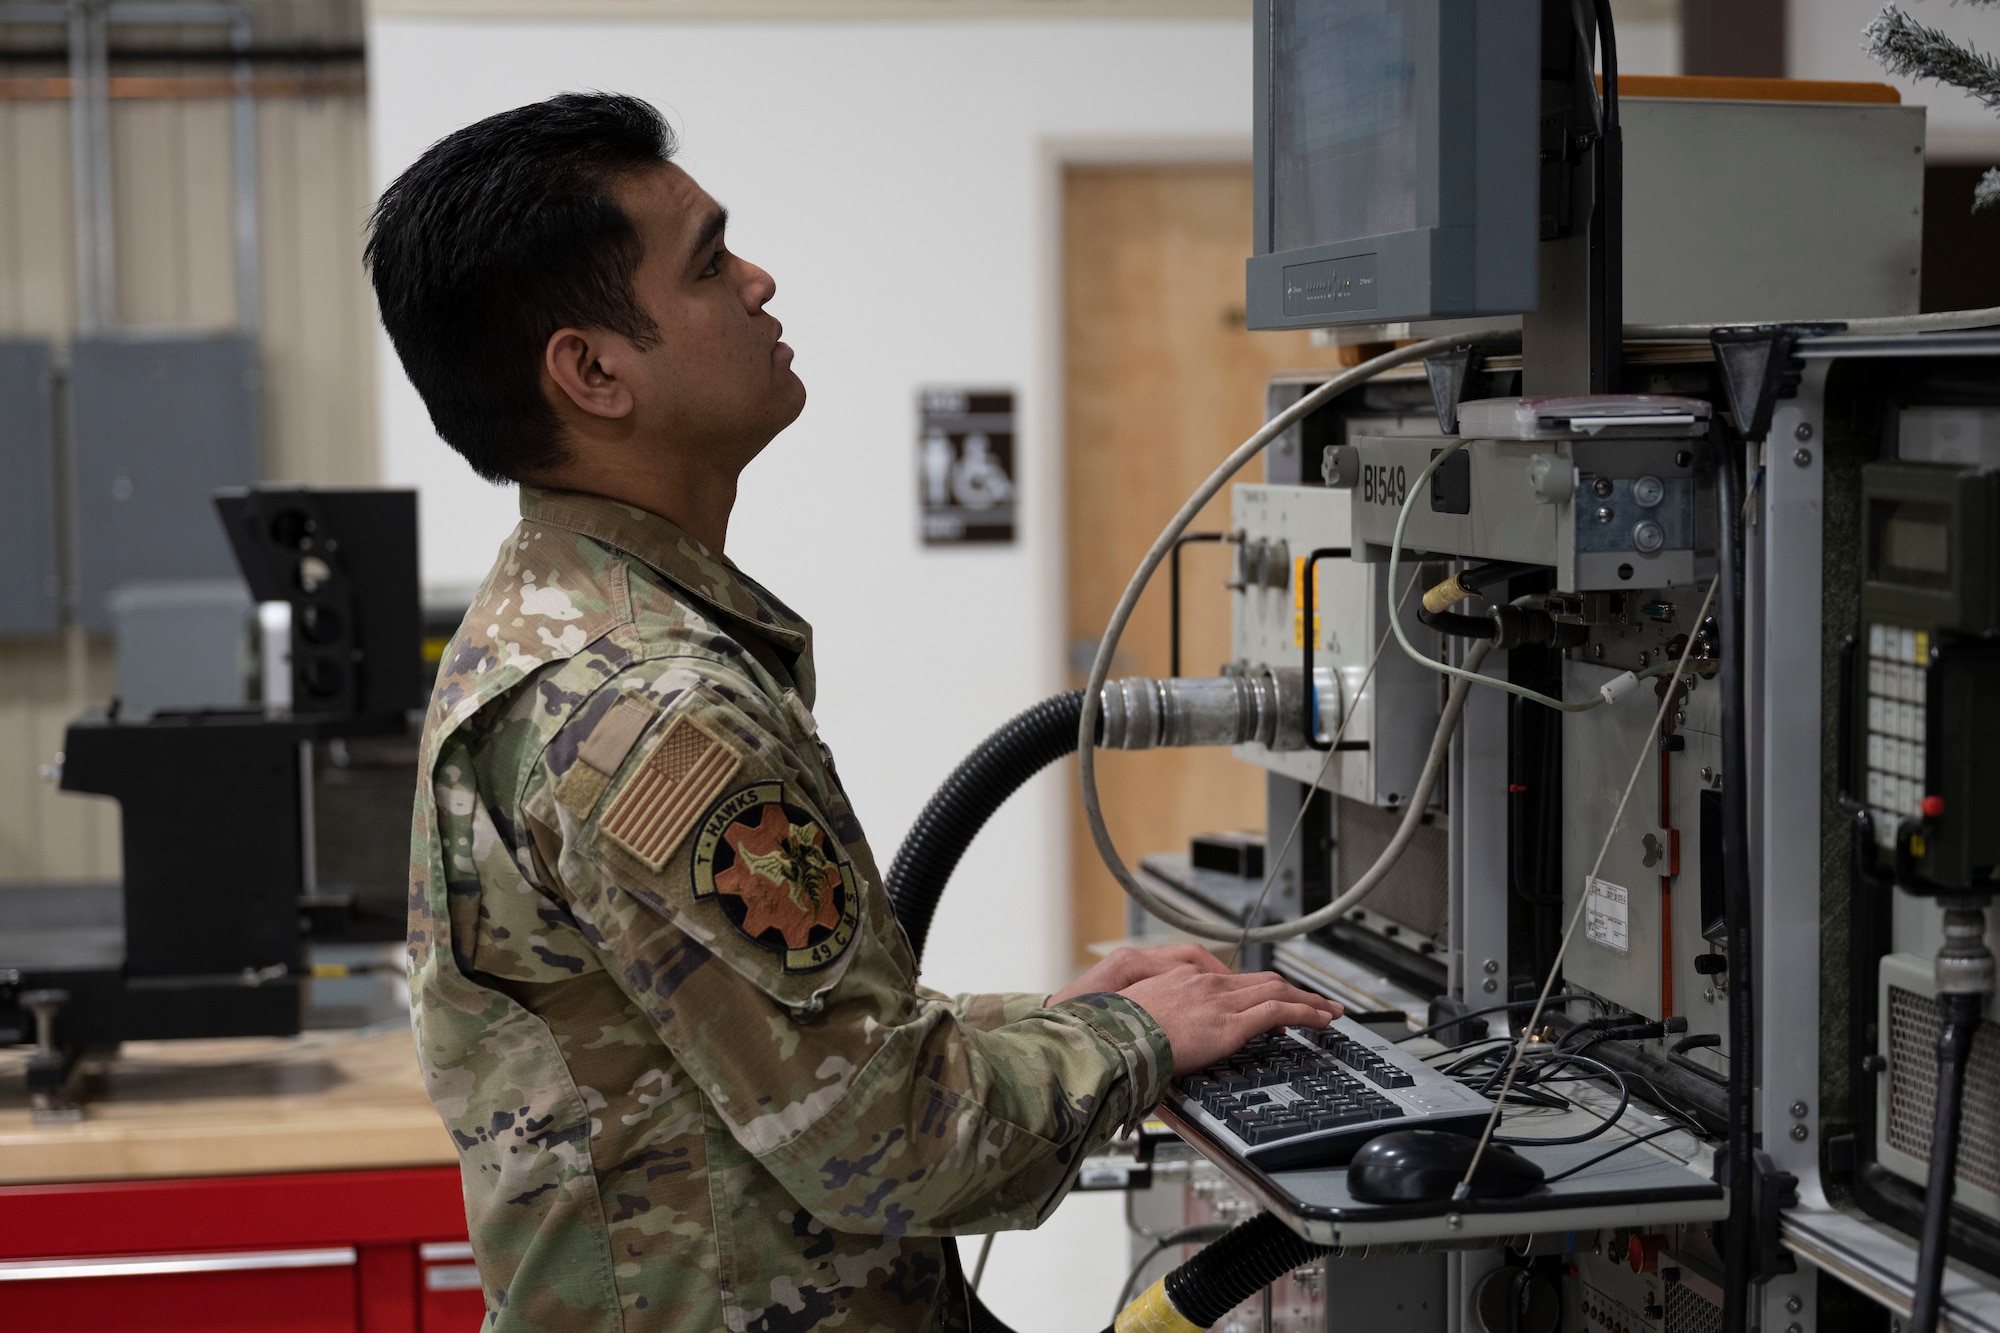 U.S. Air Force Airman 1st Class Steven Perez, 49th Component Maintenance Squadron F-16 Viper avionics apprentice, runs self-diagnostics to ensure machinery is working correctly at Holloman Air Force Base, New Mexico, May 1, 2023. The 49th CMS avionics shop provides on and off-equipment maintenance support for assigned F-16 aircraft enabling pilot production. (U.S. Air Force photo by Airman 1st Class Michelle Ferrari)